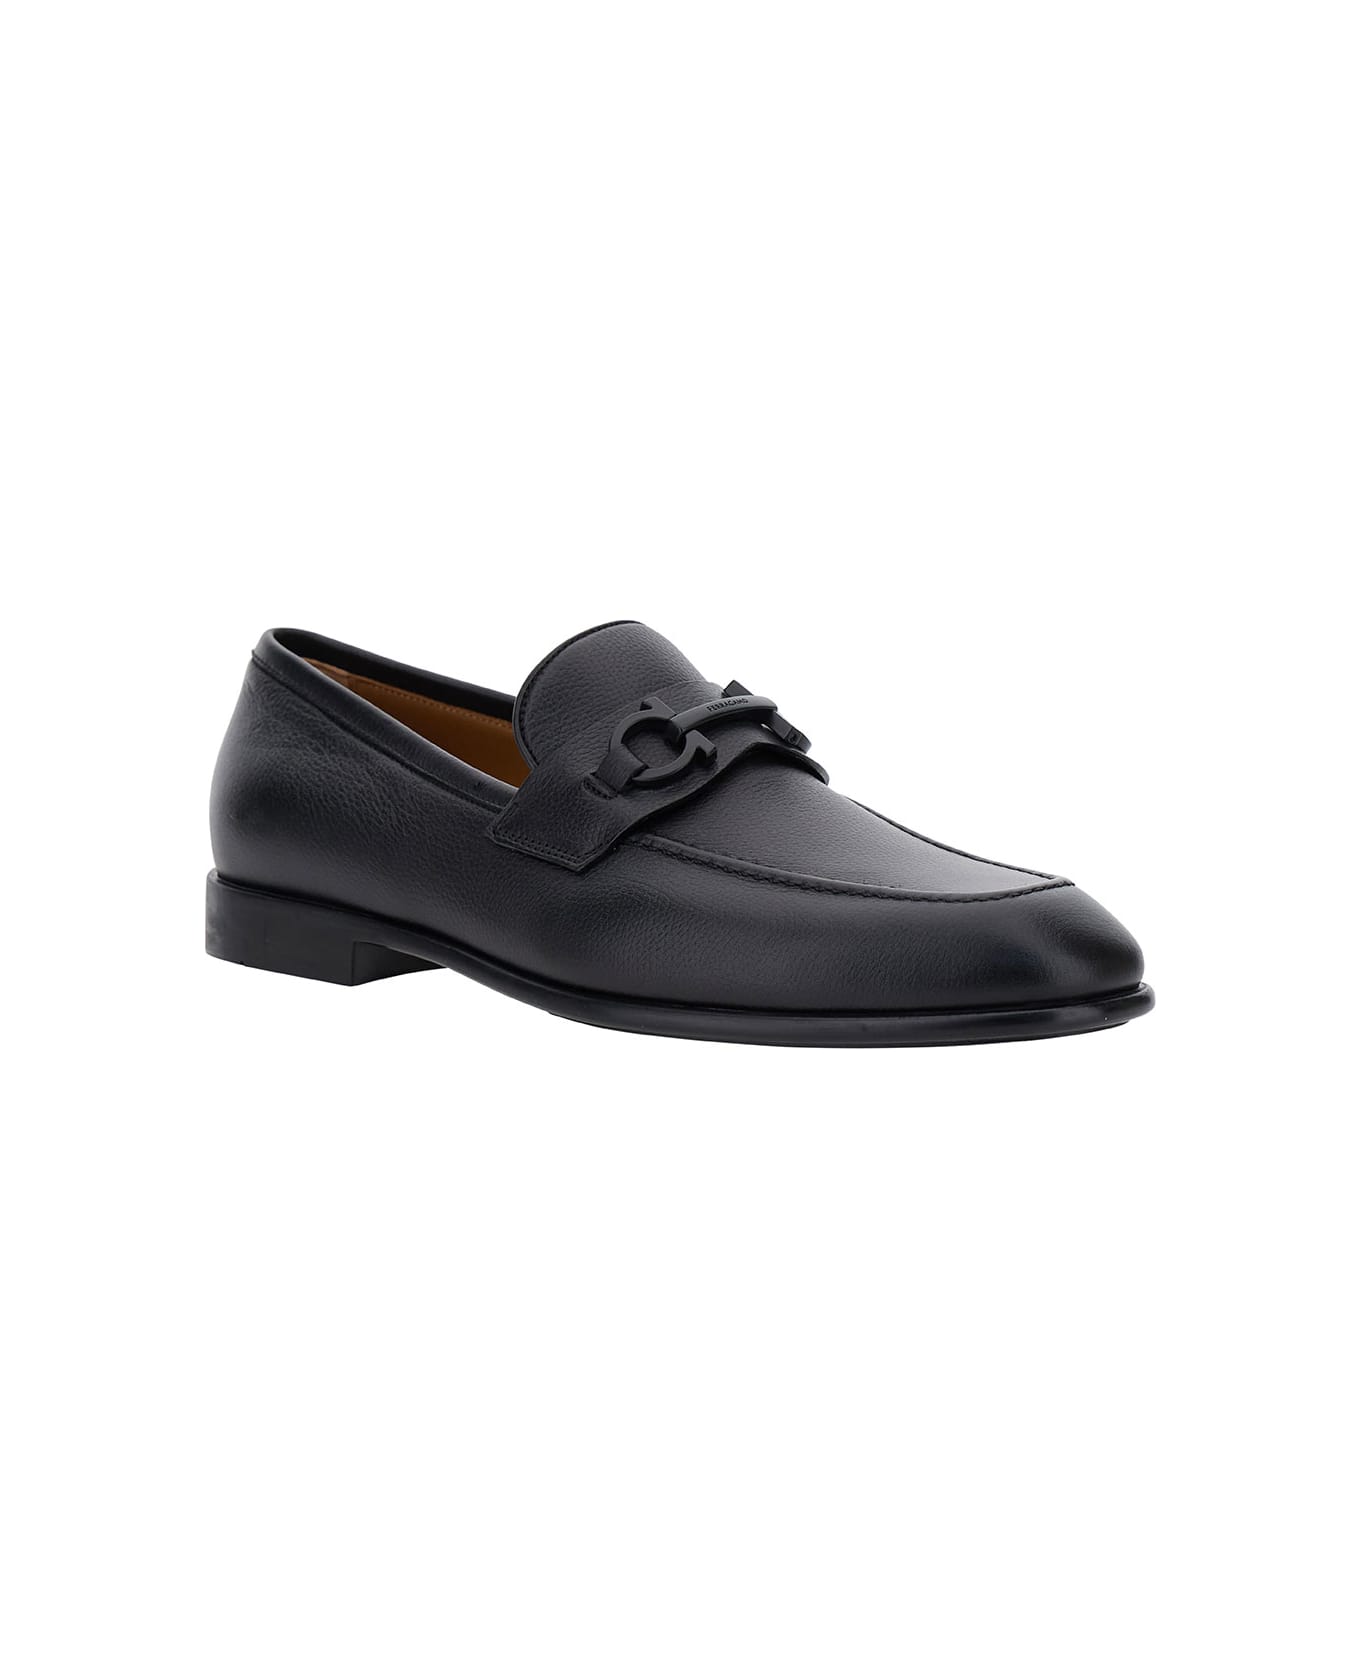 Ferragamo Black Loafers With Gancini Detail In Leather Man - Black ローファー＆デッキシューズ